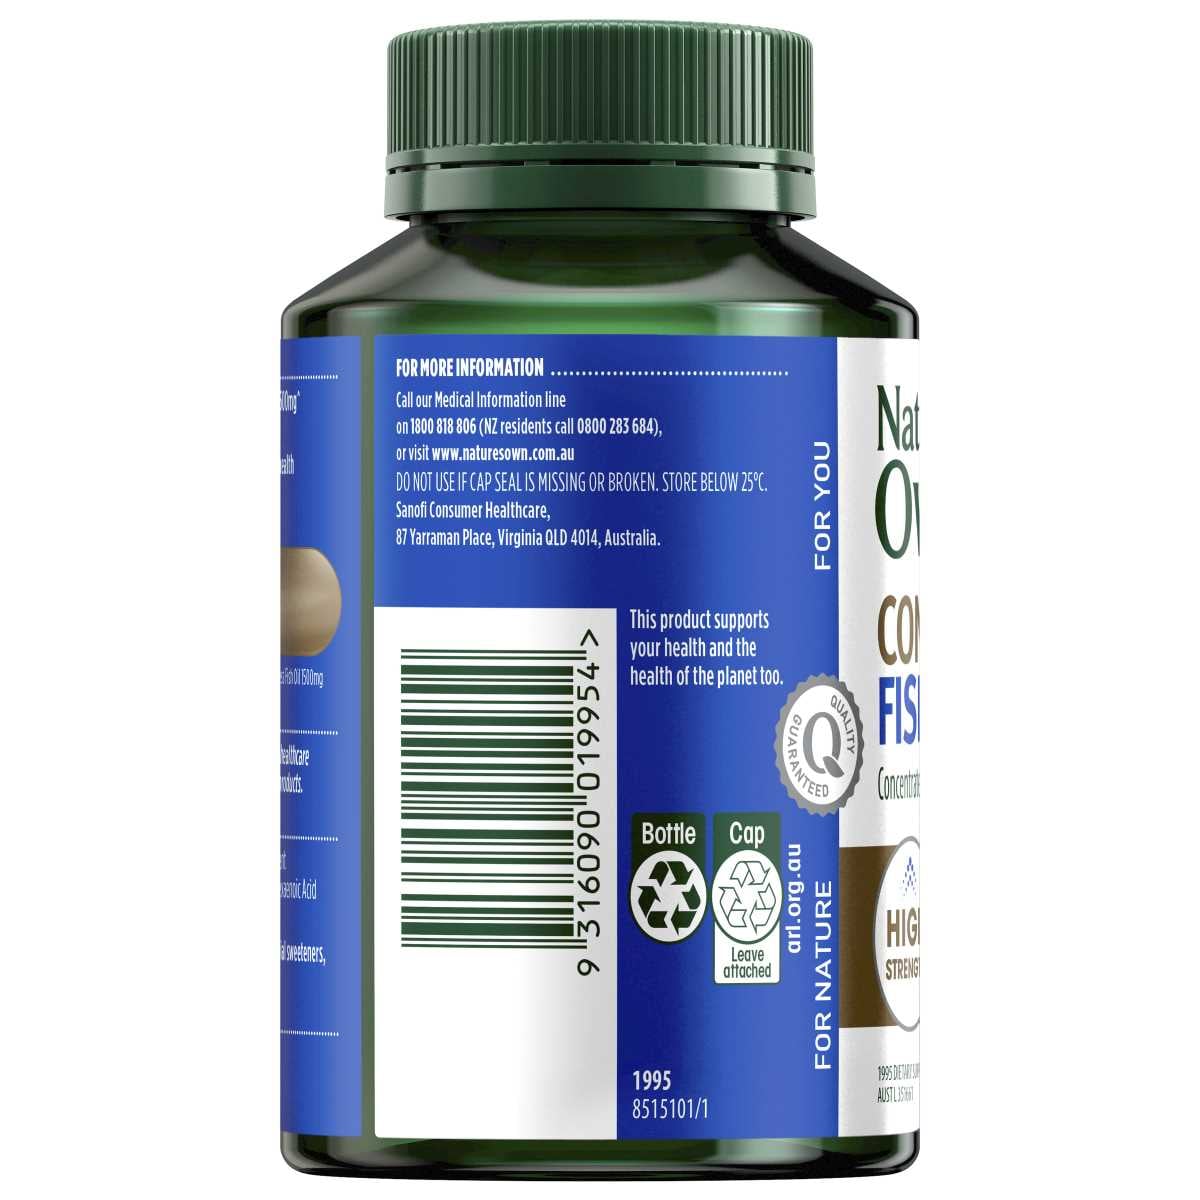 Natures Own 4 in 1 Concentrated Fish Oil 90 Capsules